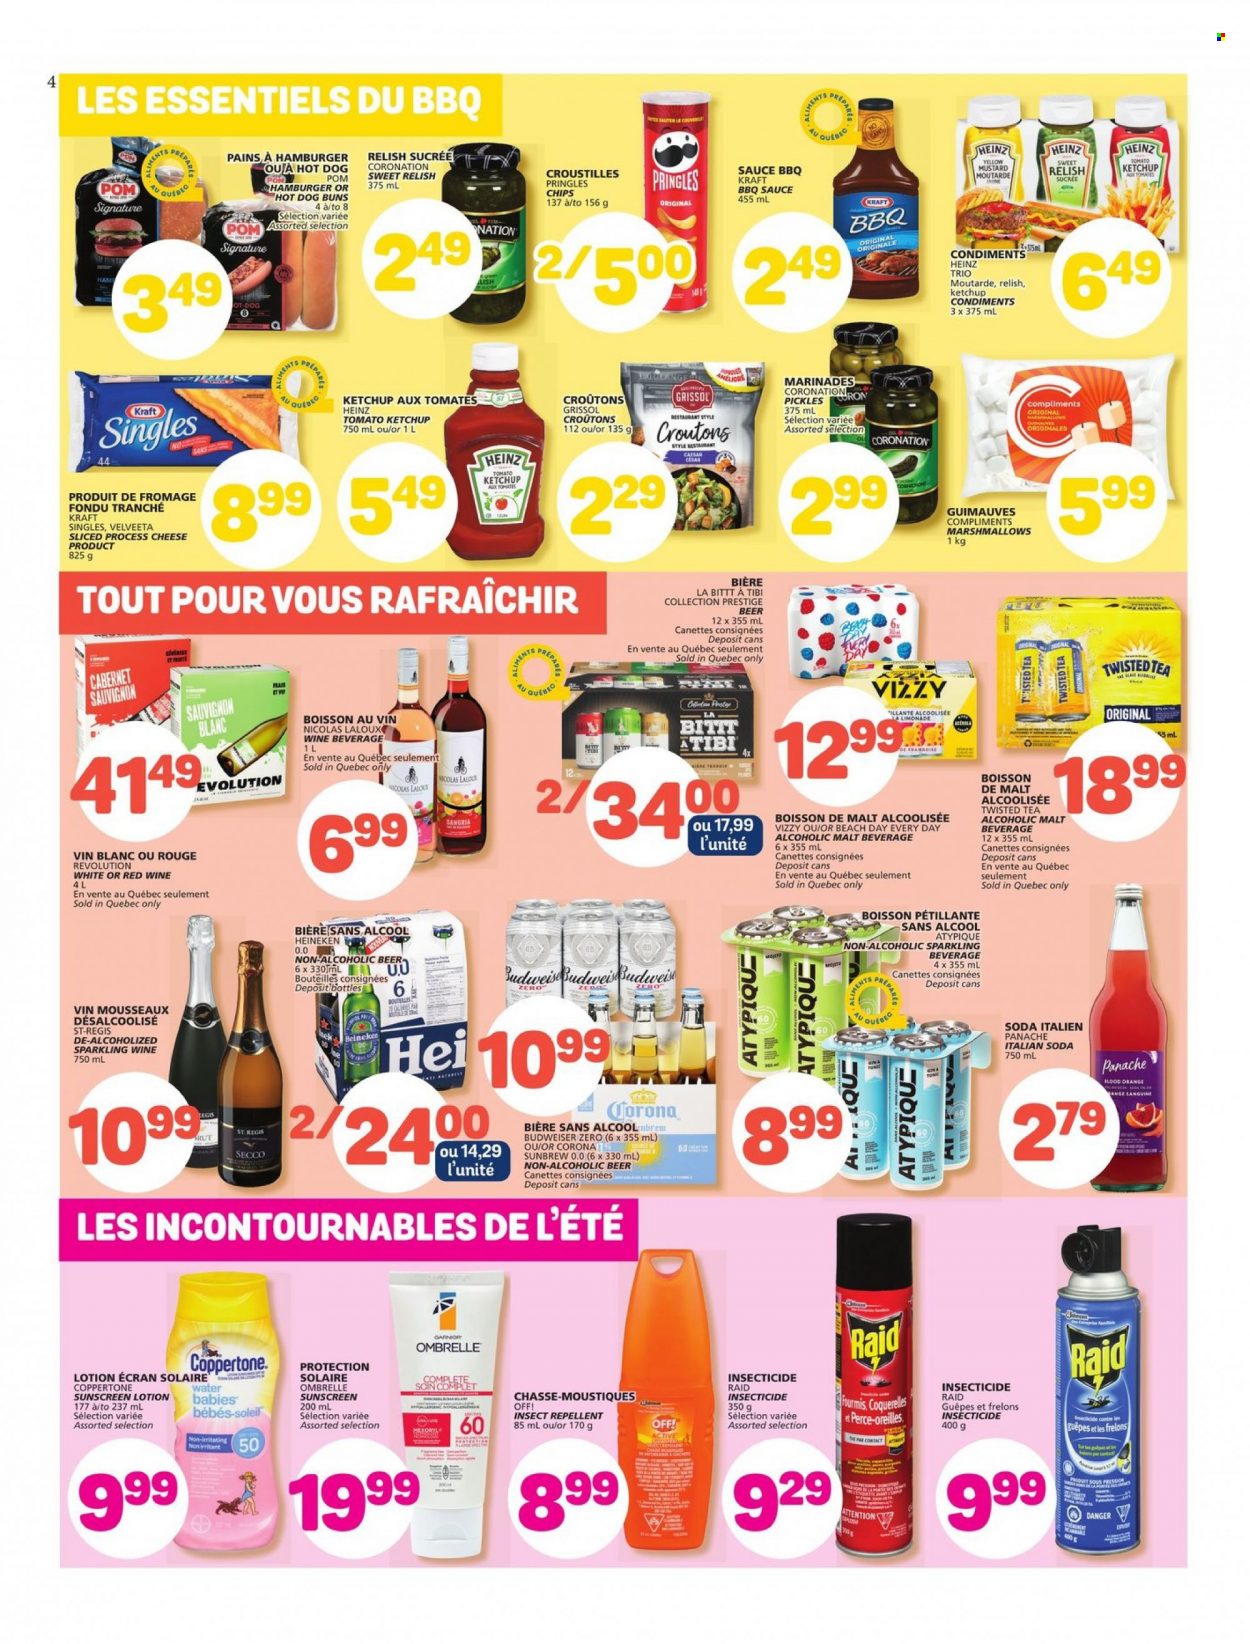 thumbnail - Marché Bonichoix Flyer - May 19, 2022 - May 25, 2022 - Sales products - buns, sauce, Kraft®, sandwich slices, cheese, Kraft Singles, marshmallows, Pringles, chips, croutons, malt, pickles, BBQ sauce, mustard, soda, tea, Cabernet Sauvignon, sparkling wine, white wine, Sauvignon Blanc, beer, Corona Extra, Heineken, body lotion, sunscreen lotion, repellent, insecticide, Raid, Budweiser, Heinz, ketchup, oranges, Twisted Tea. Page 4.